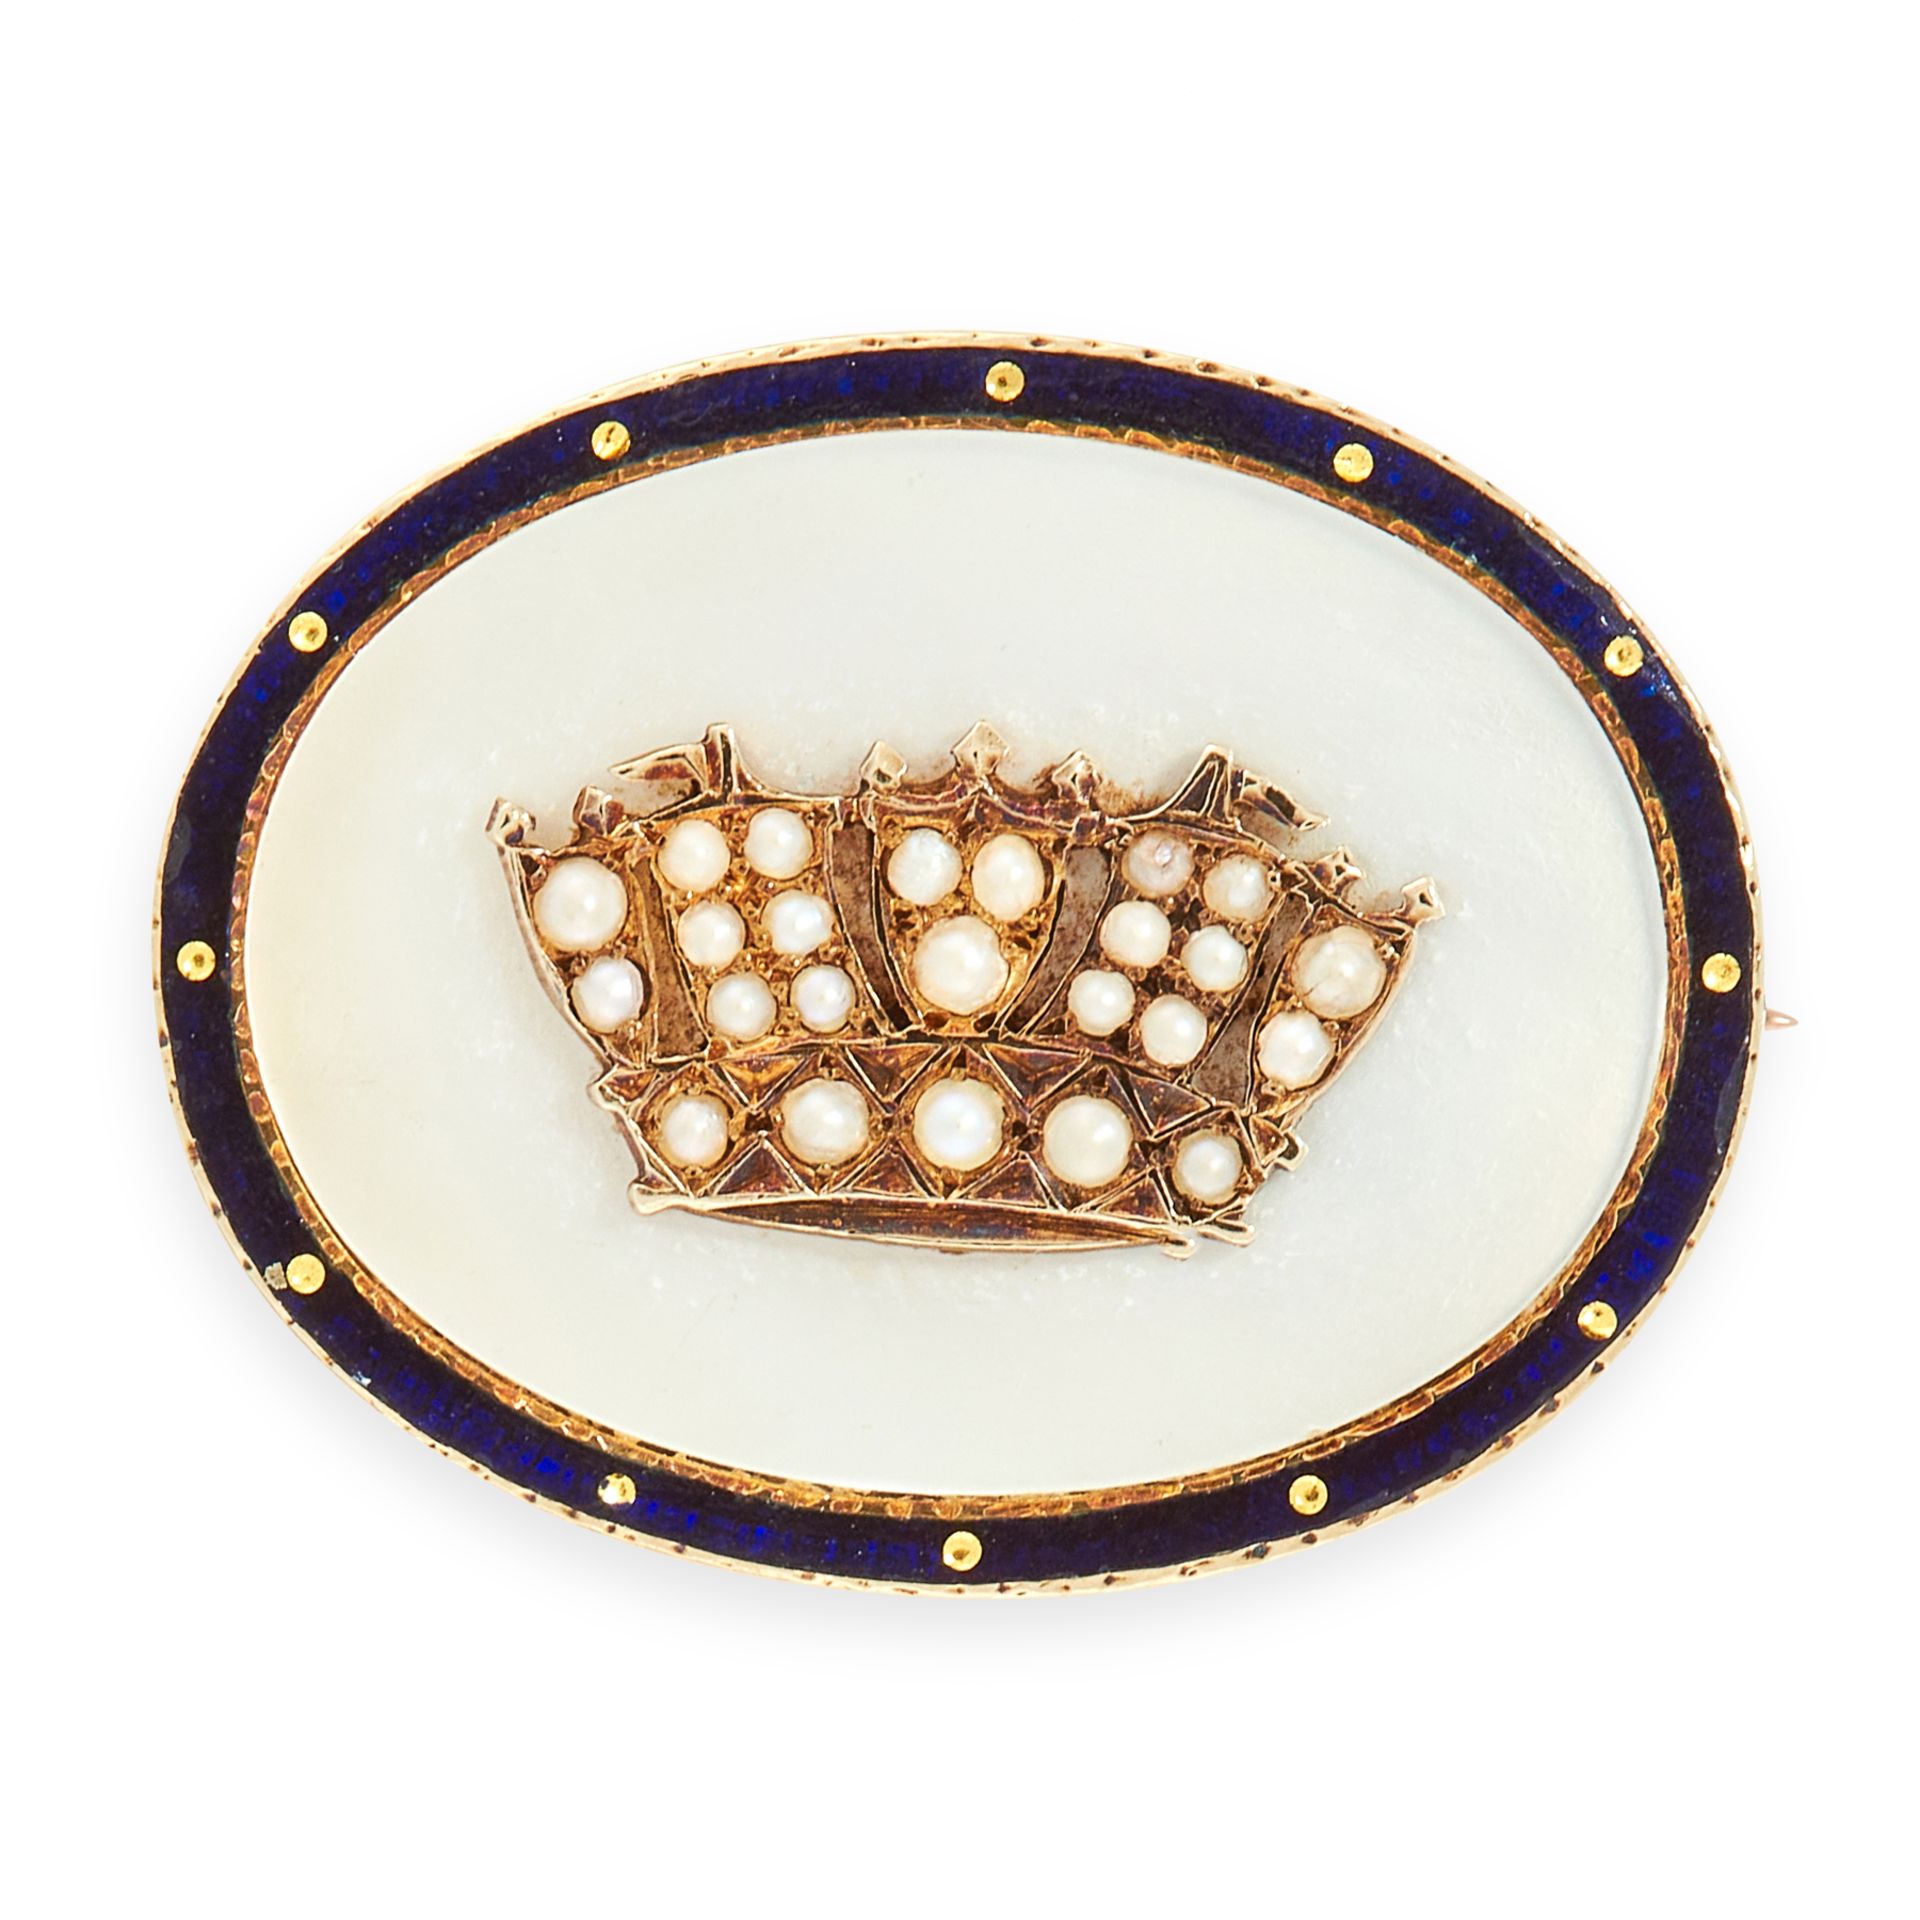 AN ANTIQUE PEARL, MOTHER OF PEARL AND ENAMEL BROOCH in 15ct yellow gold, set with a polished oval